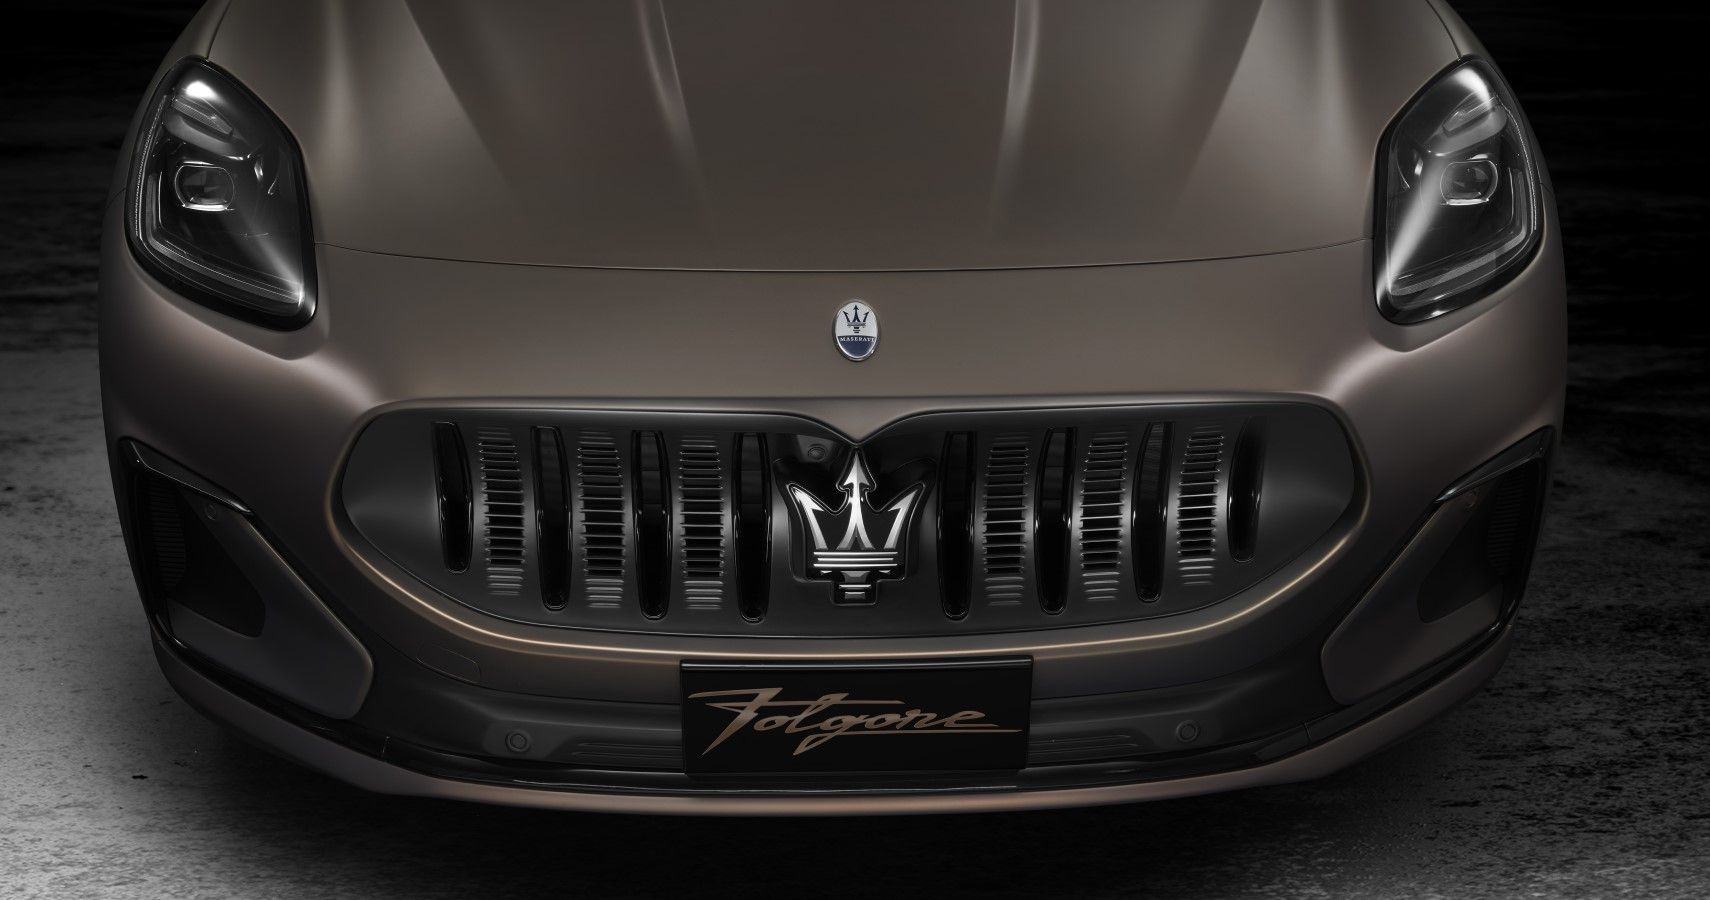 Maserati Grecale Folgore front grille close-up view